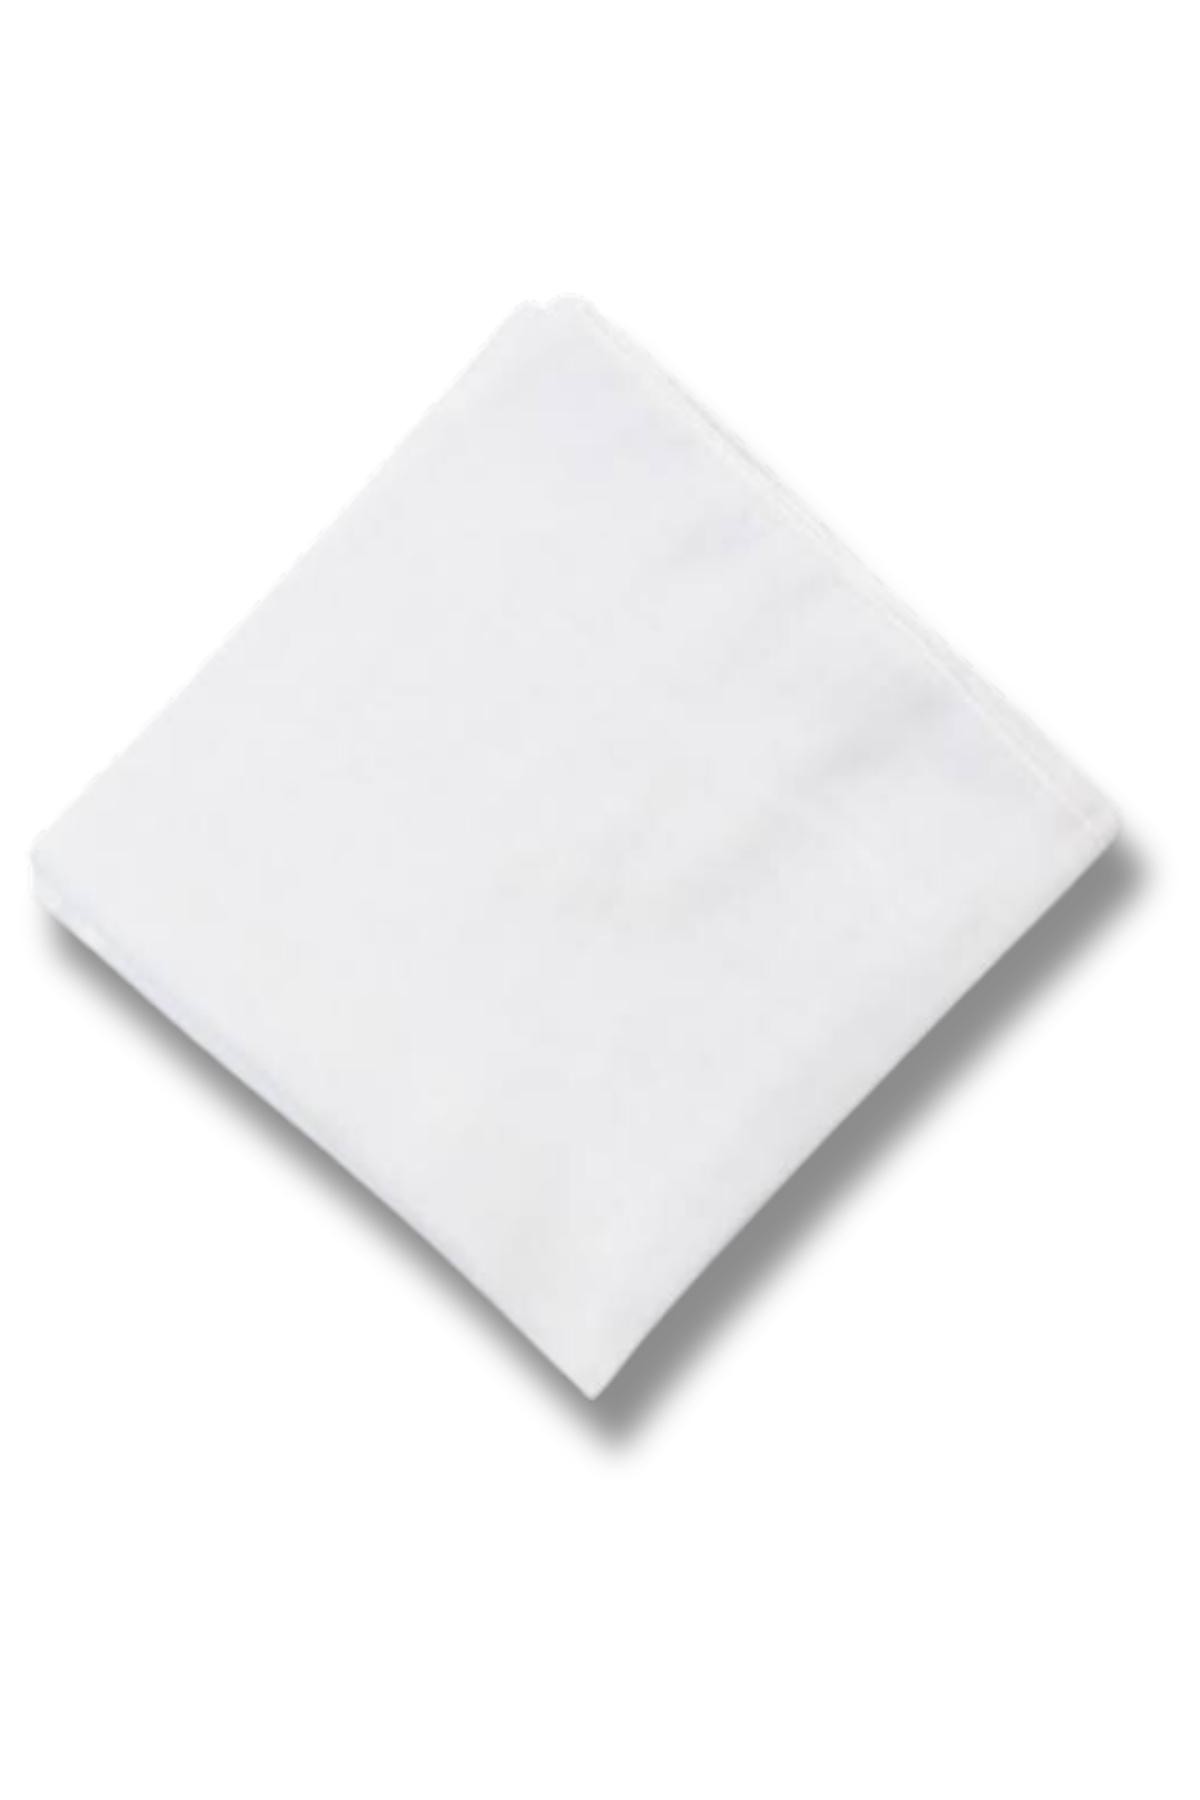 Cotton Inner Cheesecloth - White